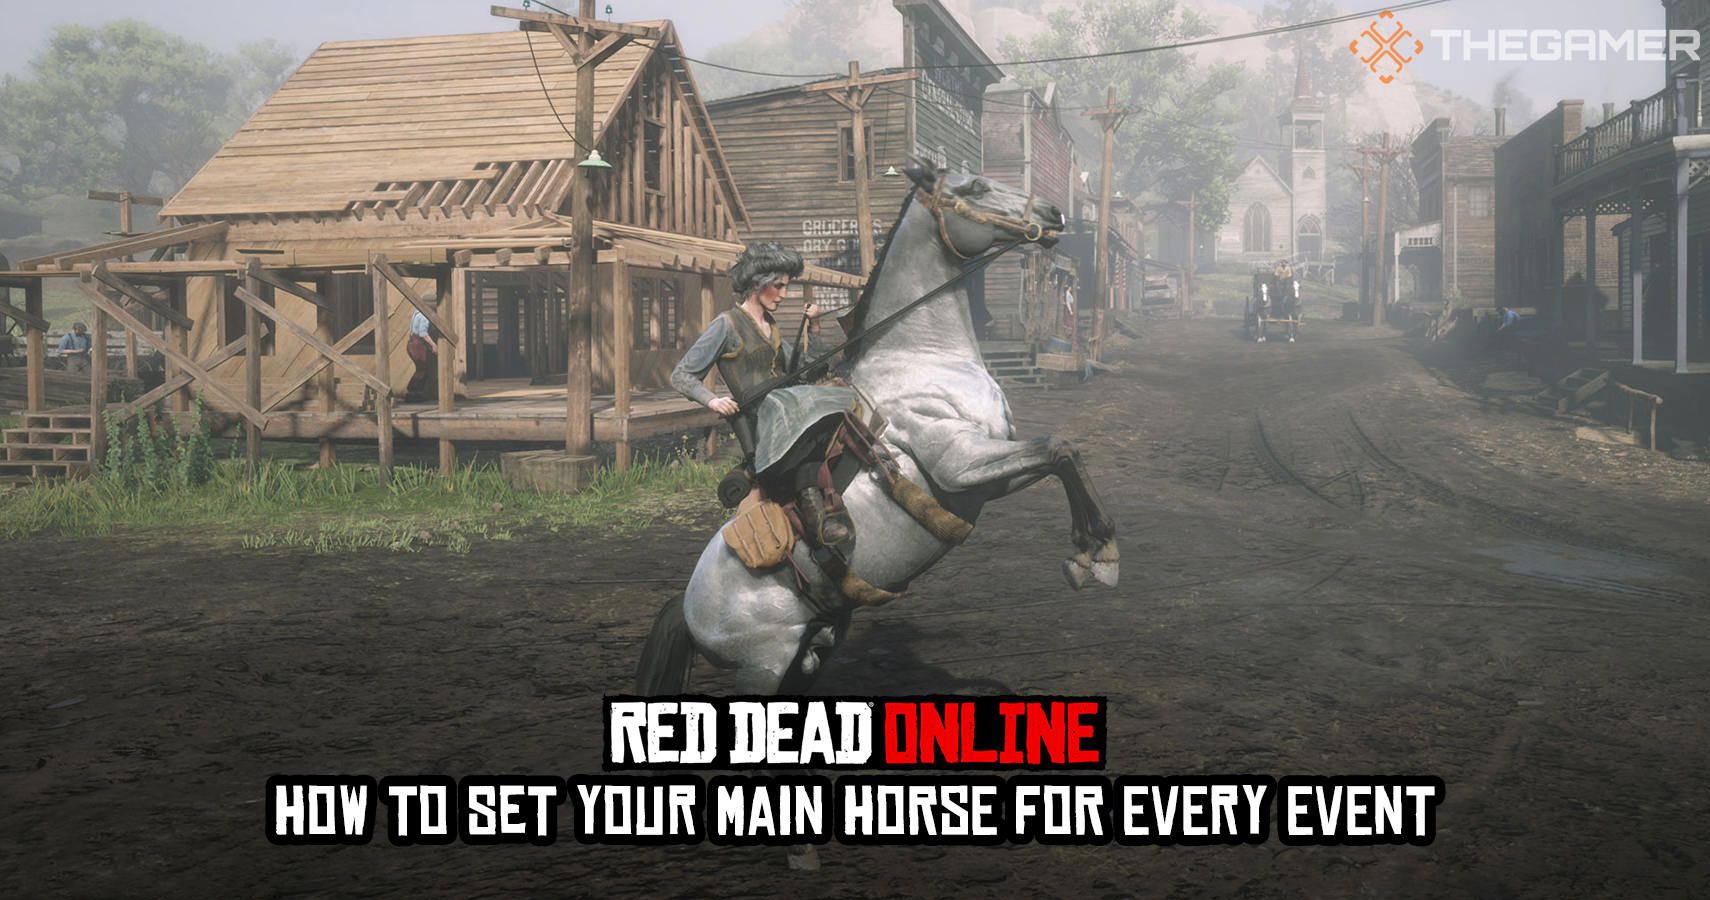 krans Disse Ugle How To Set Your Main Horse For Every Event In Red Dead Online